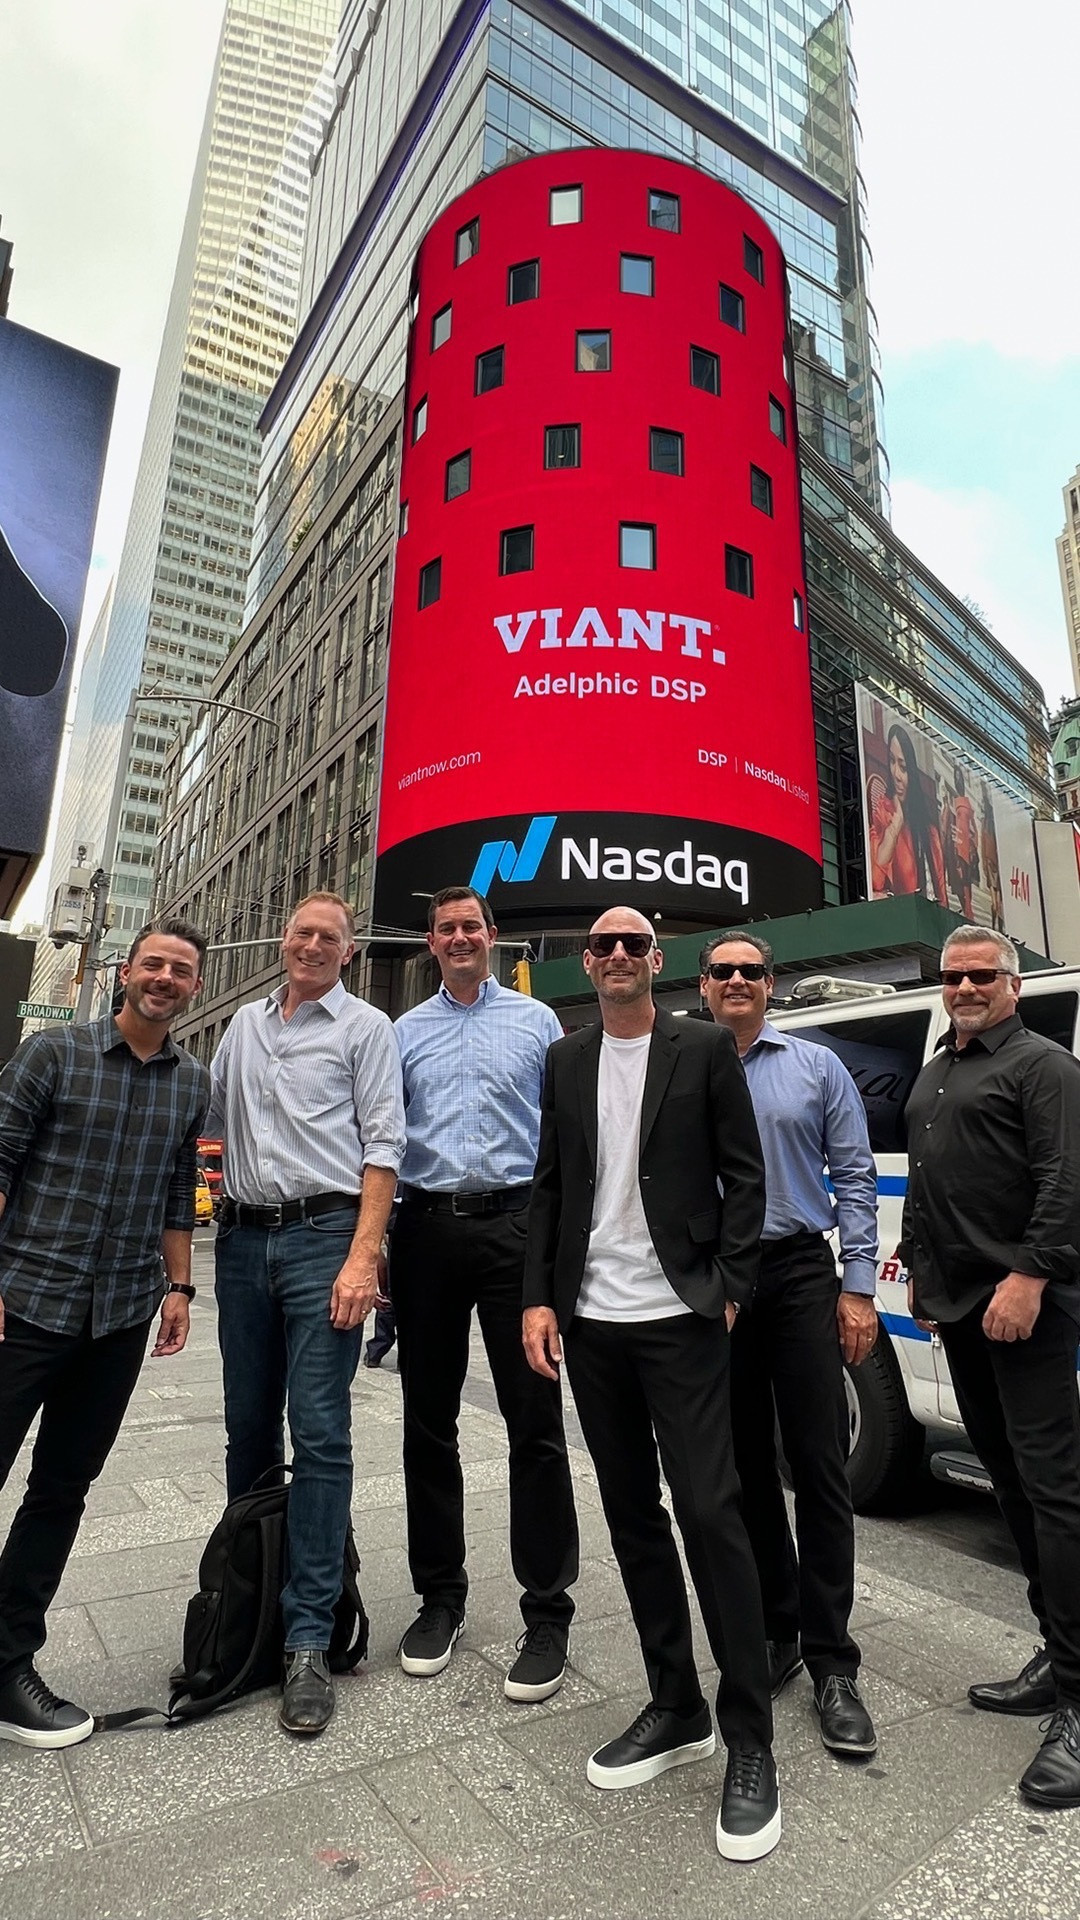 Members of our leadership team proudly stand in front of our Viant billboard on the NASDAQ tower in NYC.